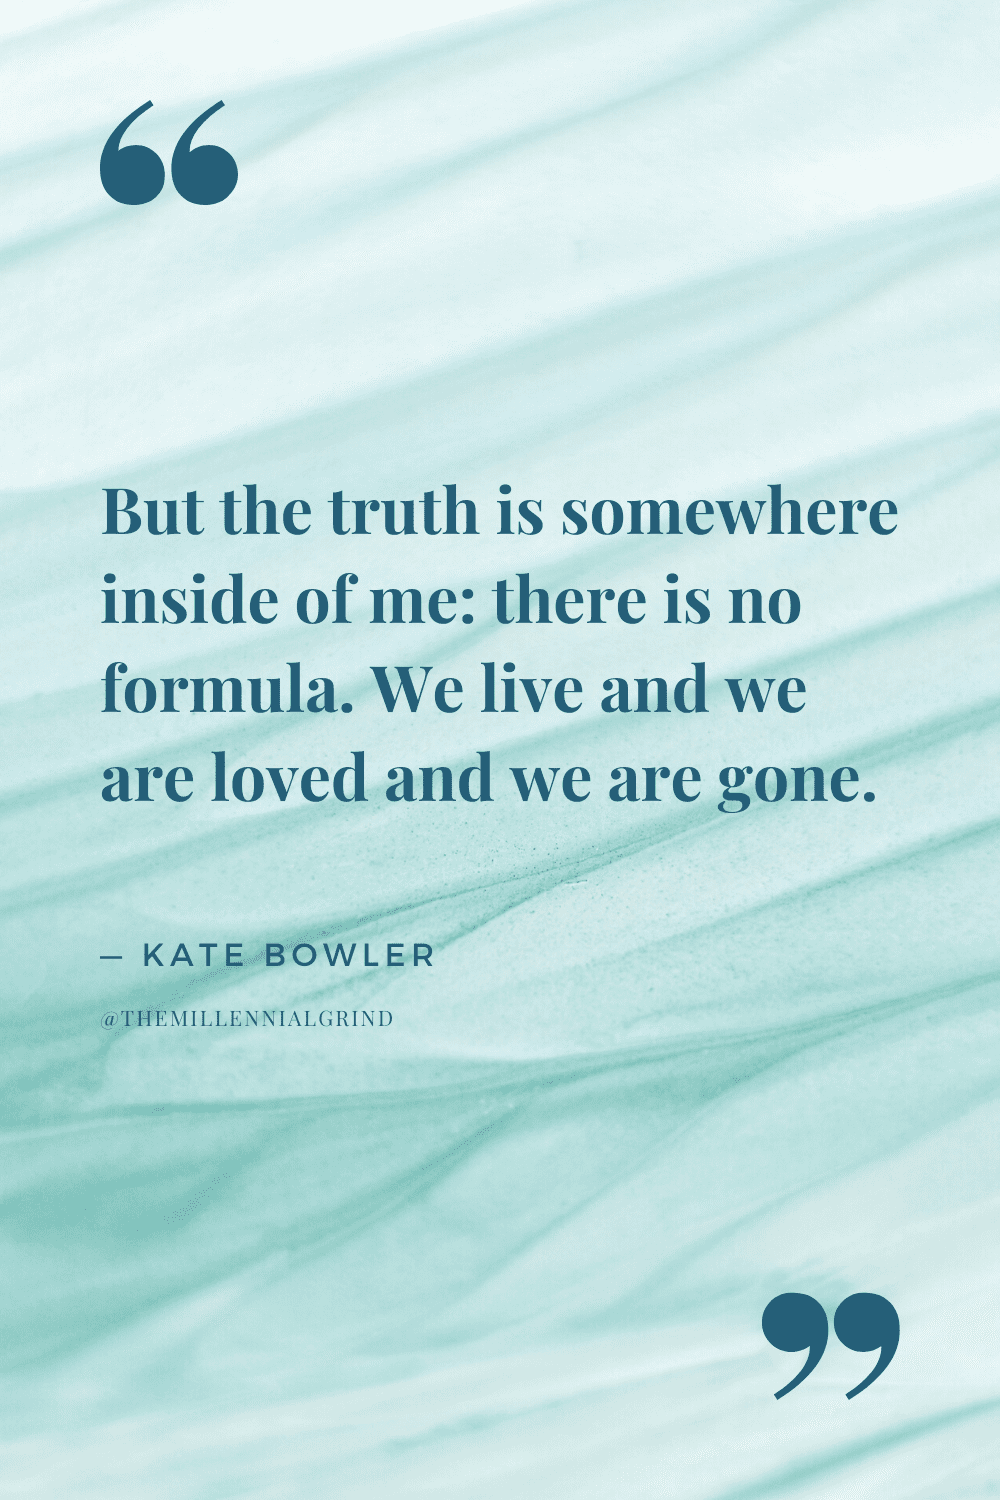 Quotes from No Cure for Being Human by Kate Bowler